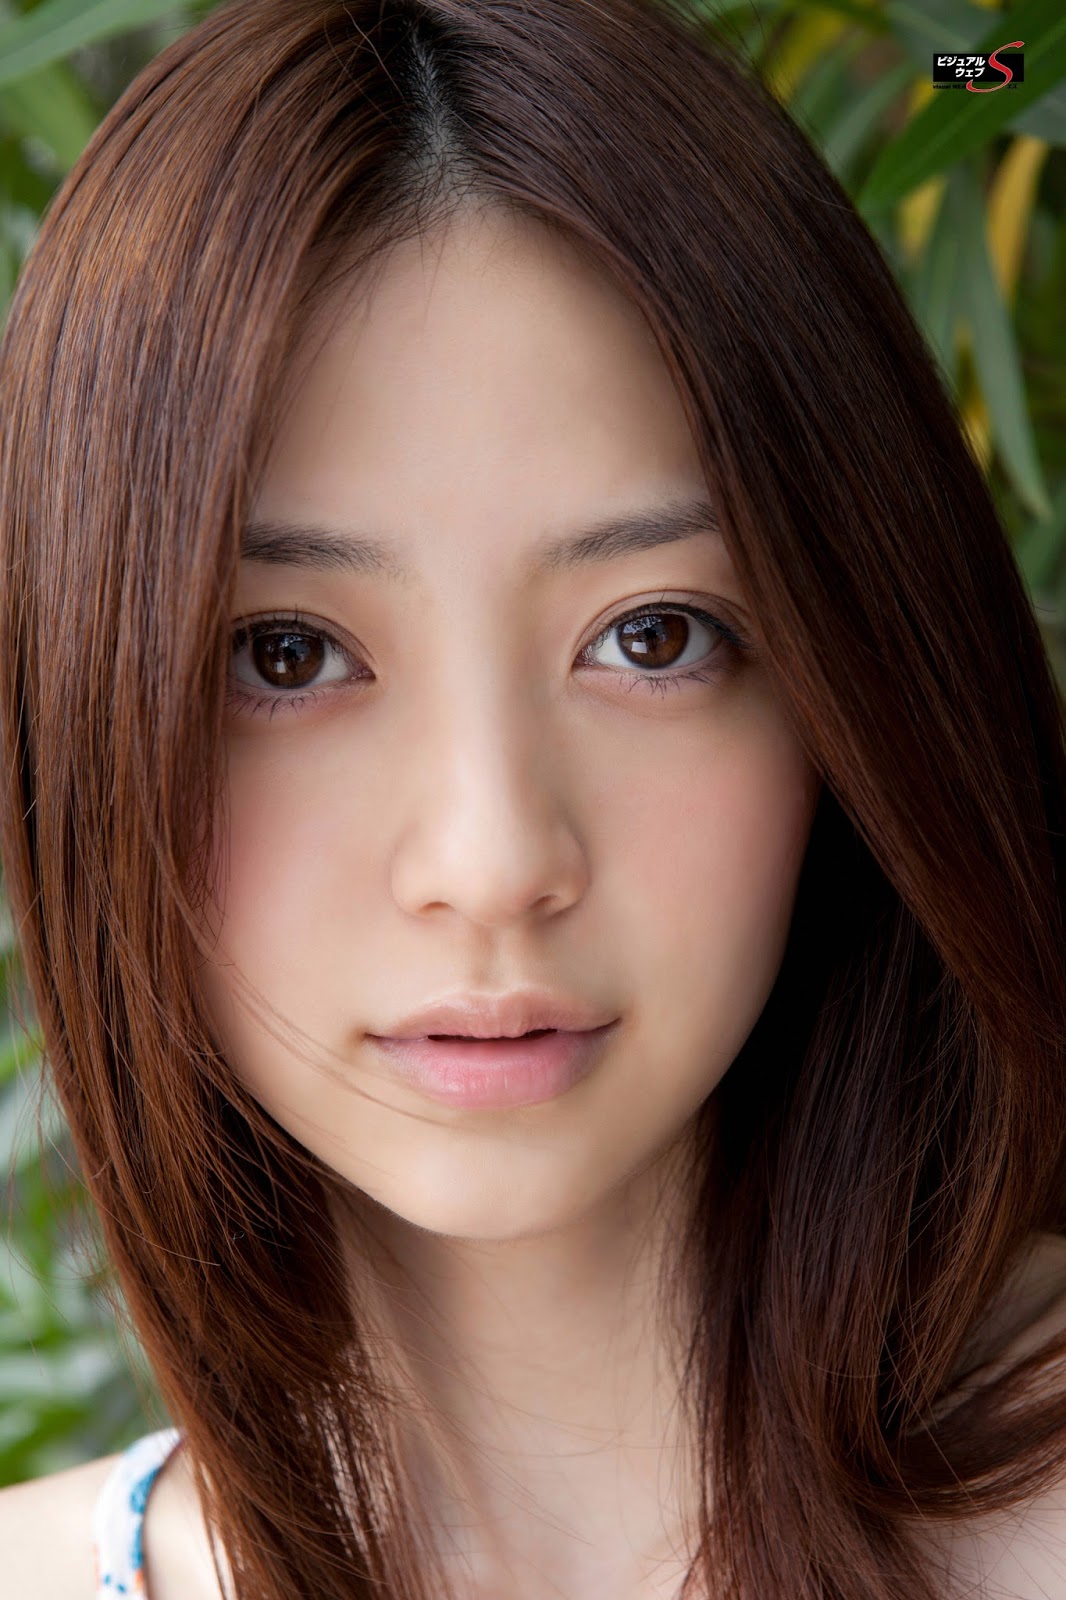 Japanese Girl Pictures Cute Pic Rina Aizawa And Her Stunning Beautiful Face